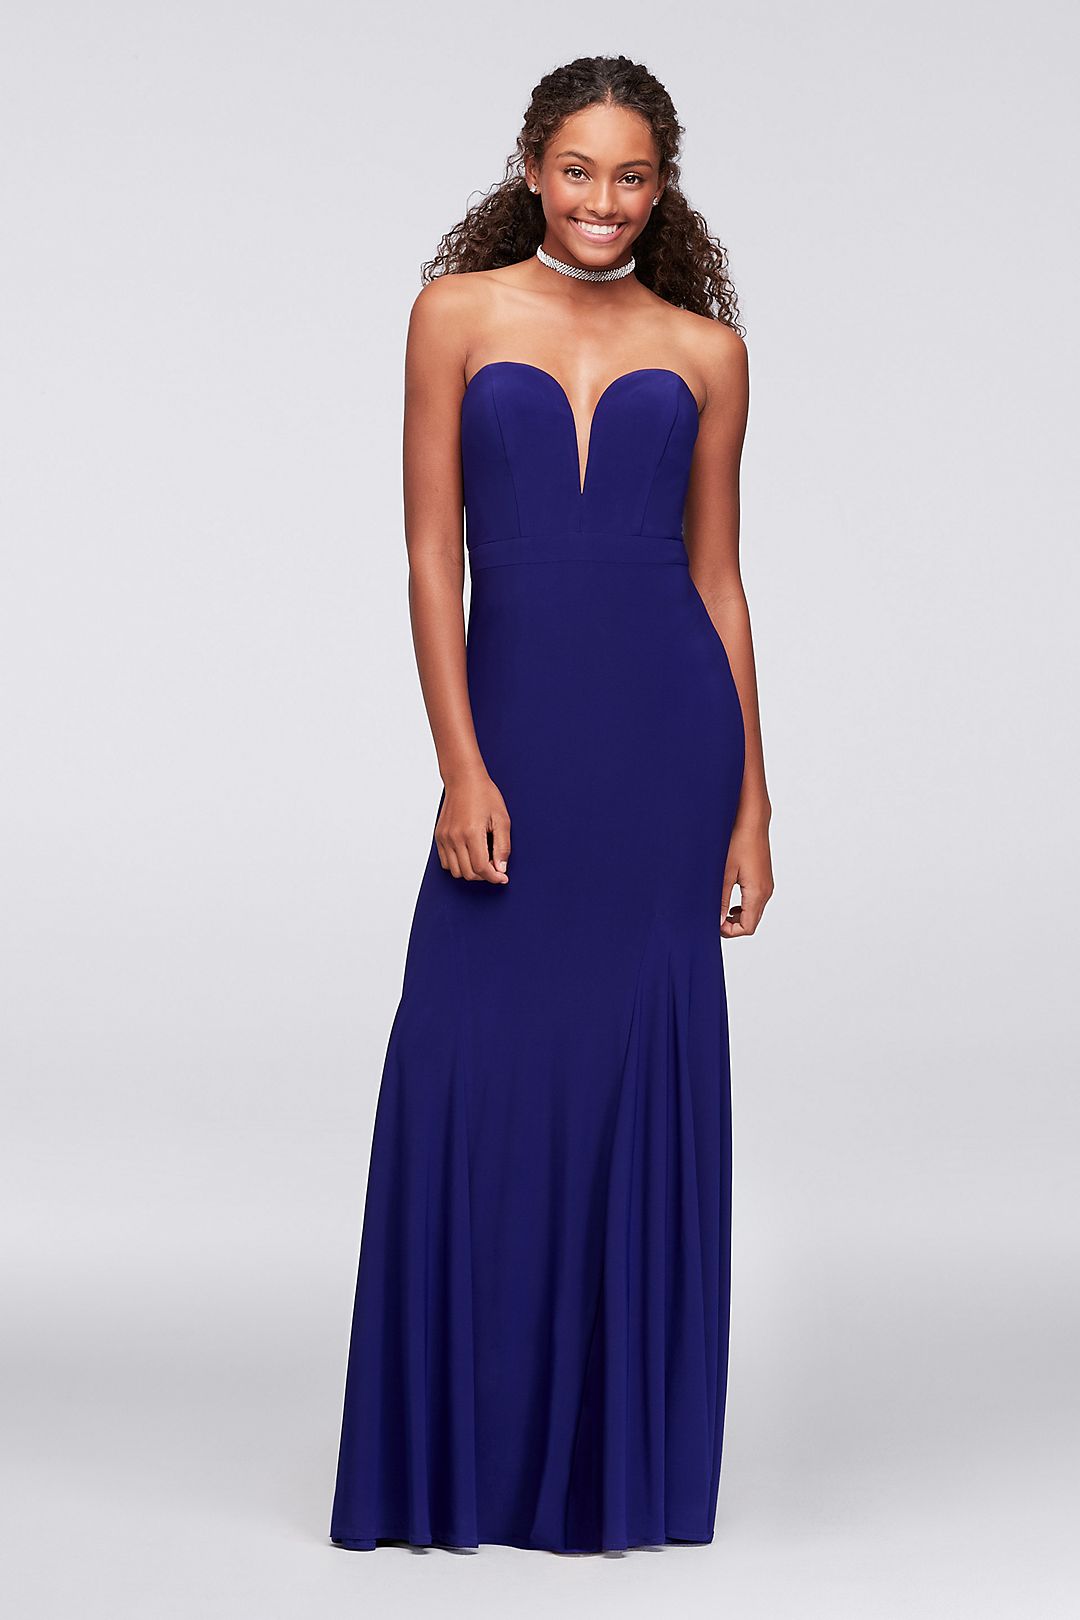 Strapless Sweetheart Plunge Jersey Mermaid Gown  Image 1